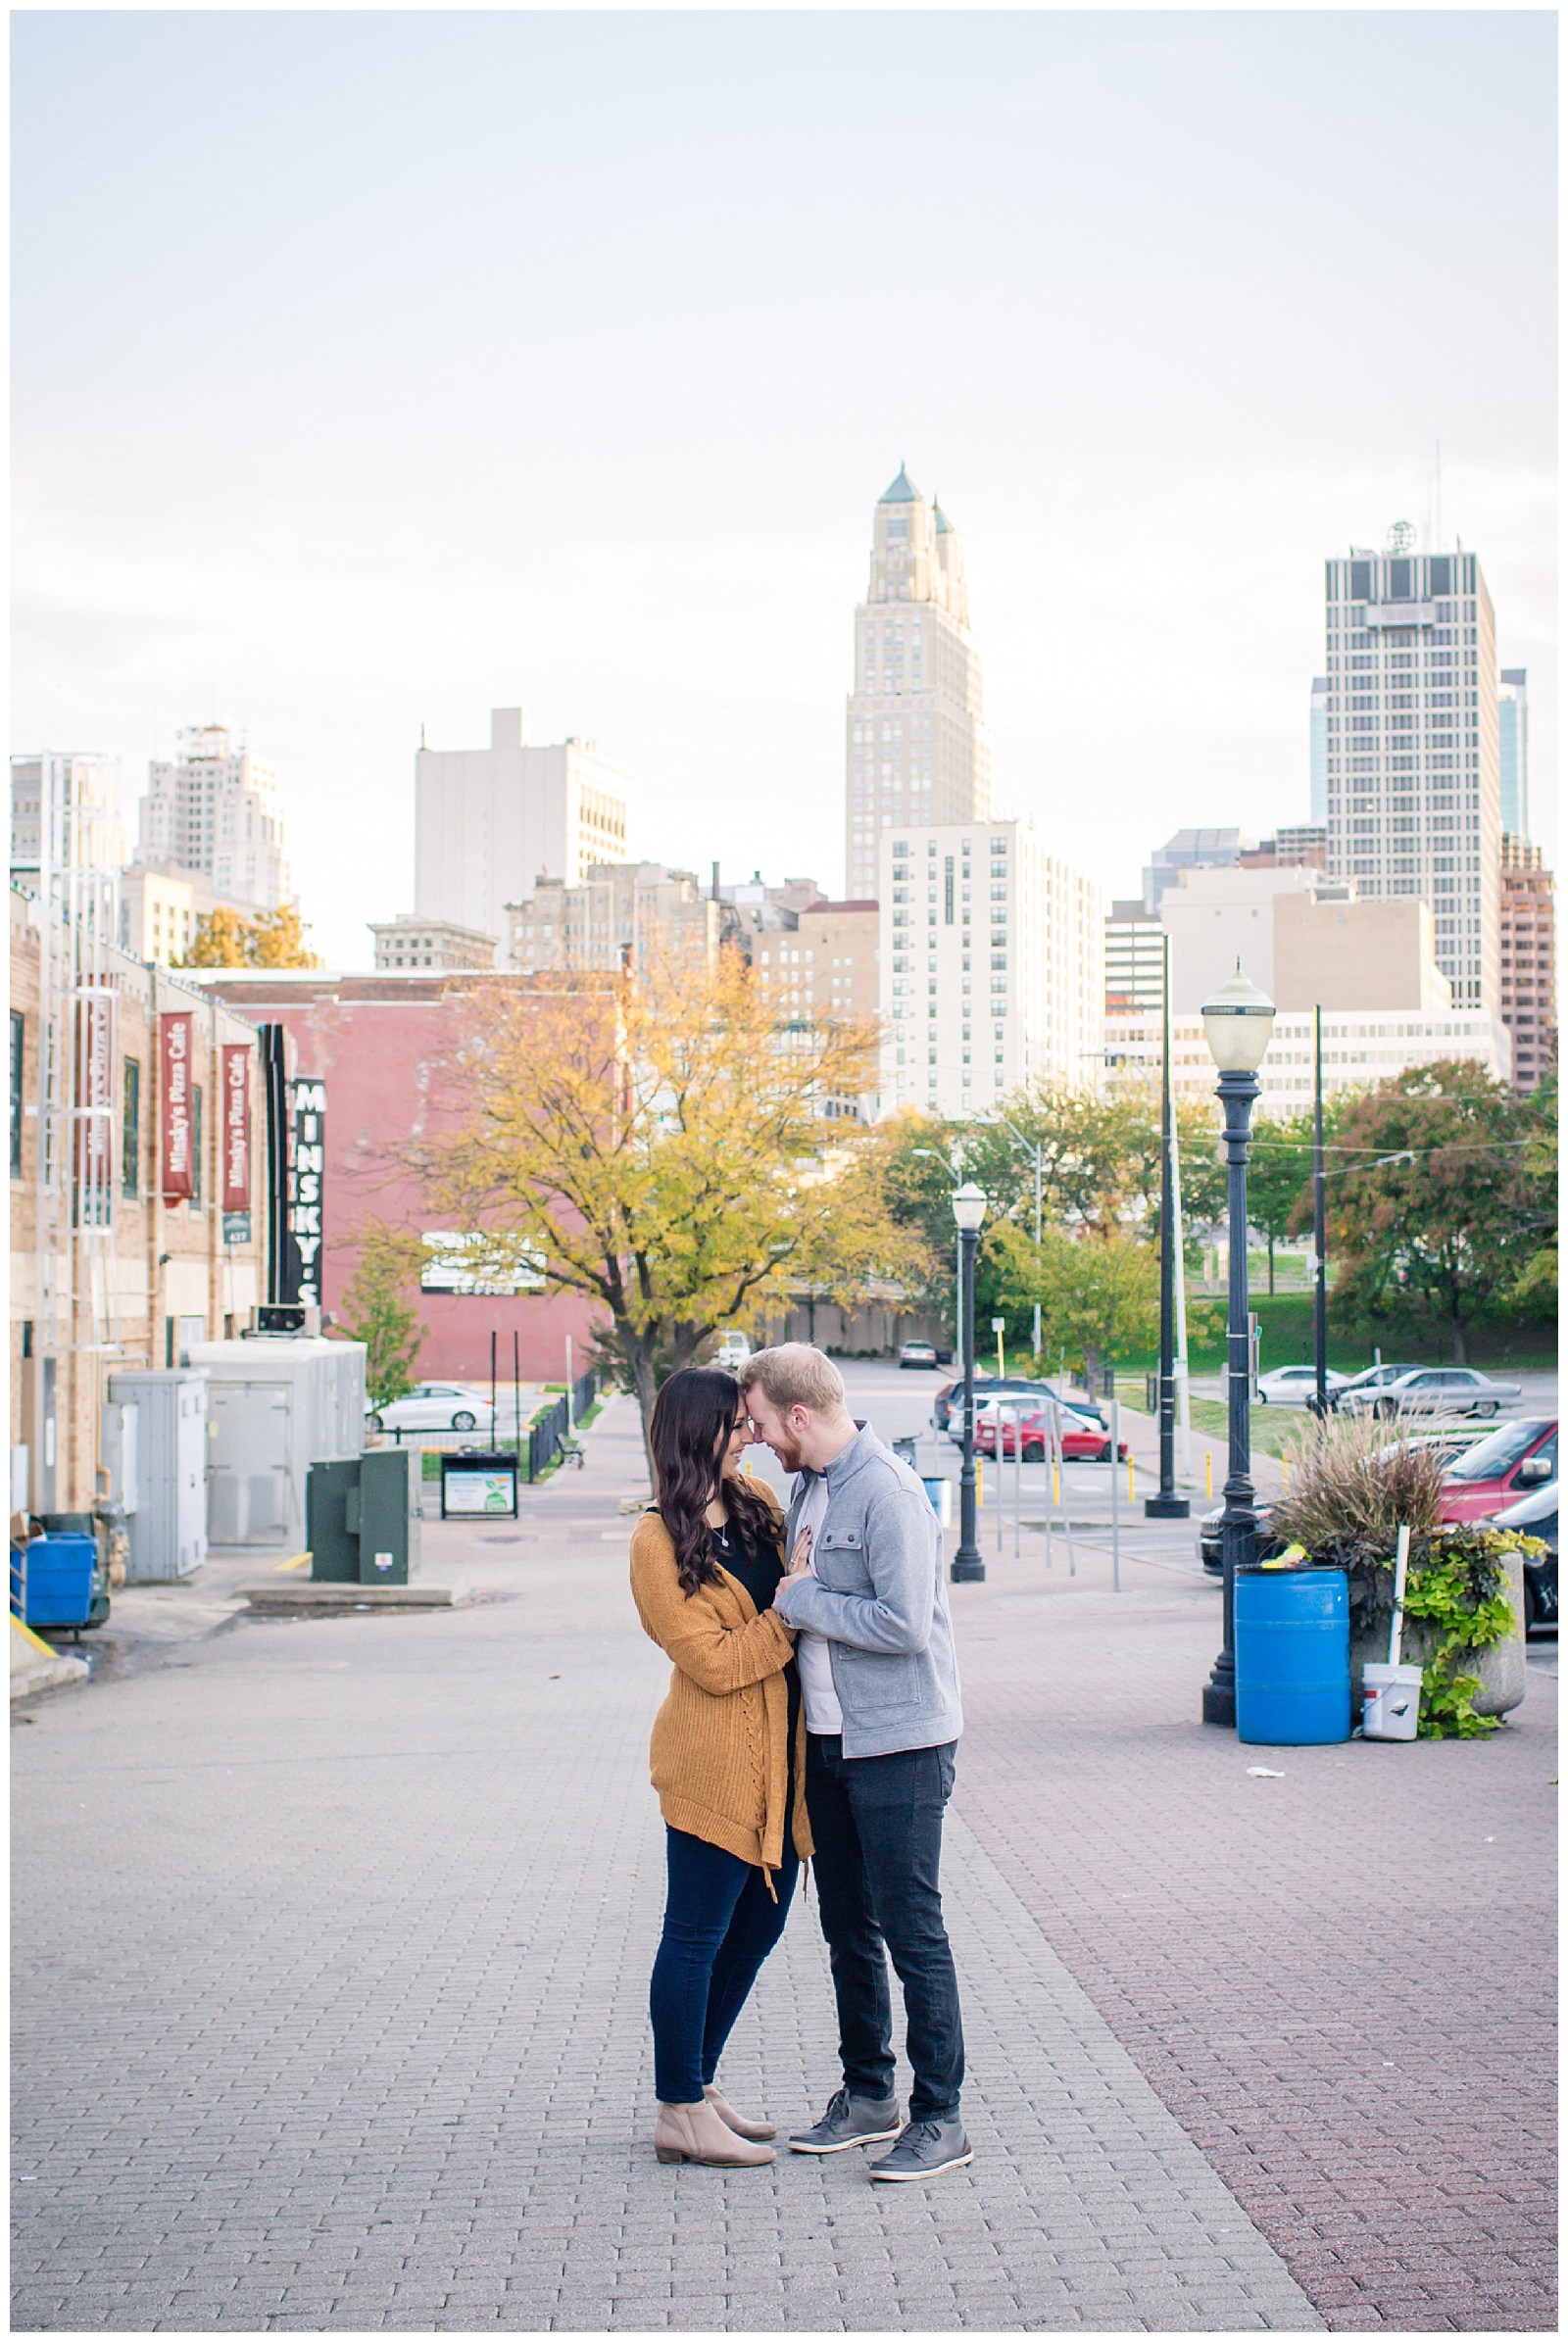 Engagement photography in the River Market by Kansas City wedding photographers Wisdom-Watson Weddings.